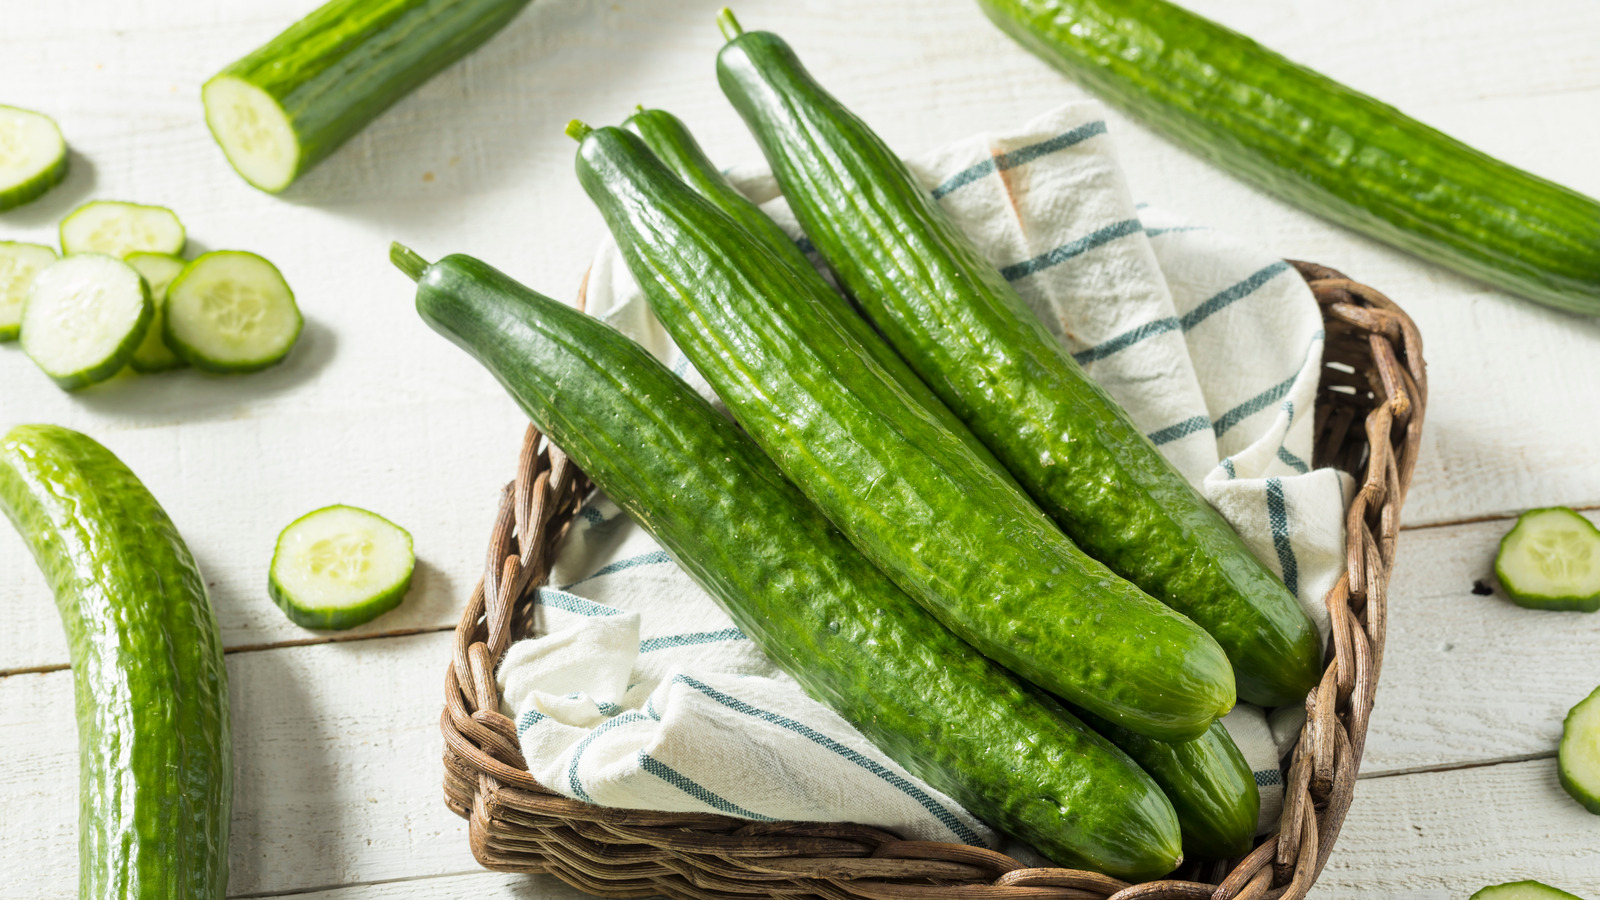 What Is An English Cucumber?